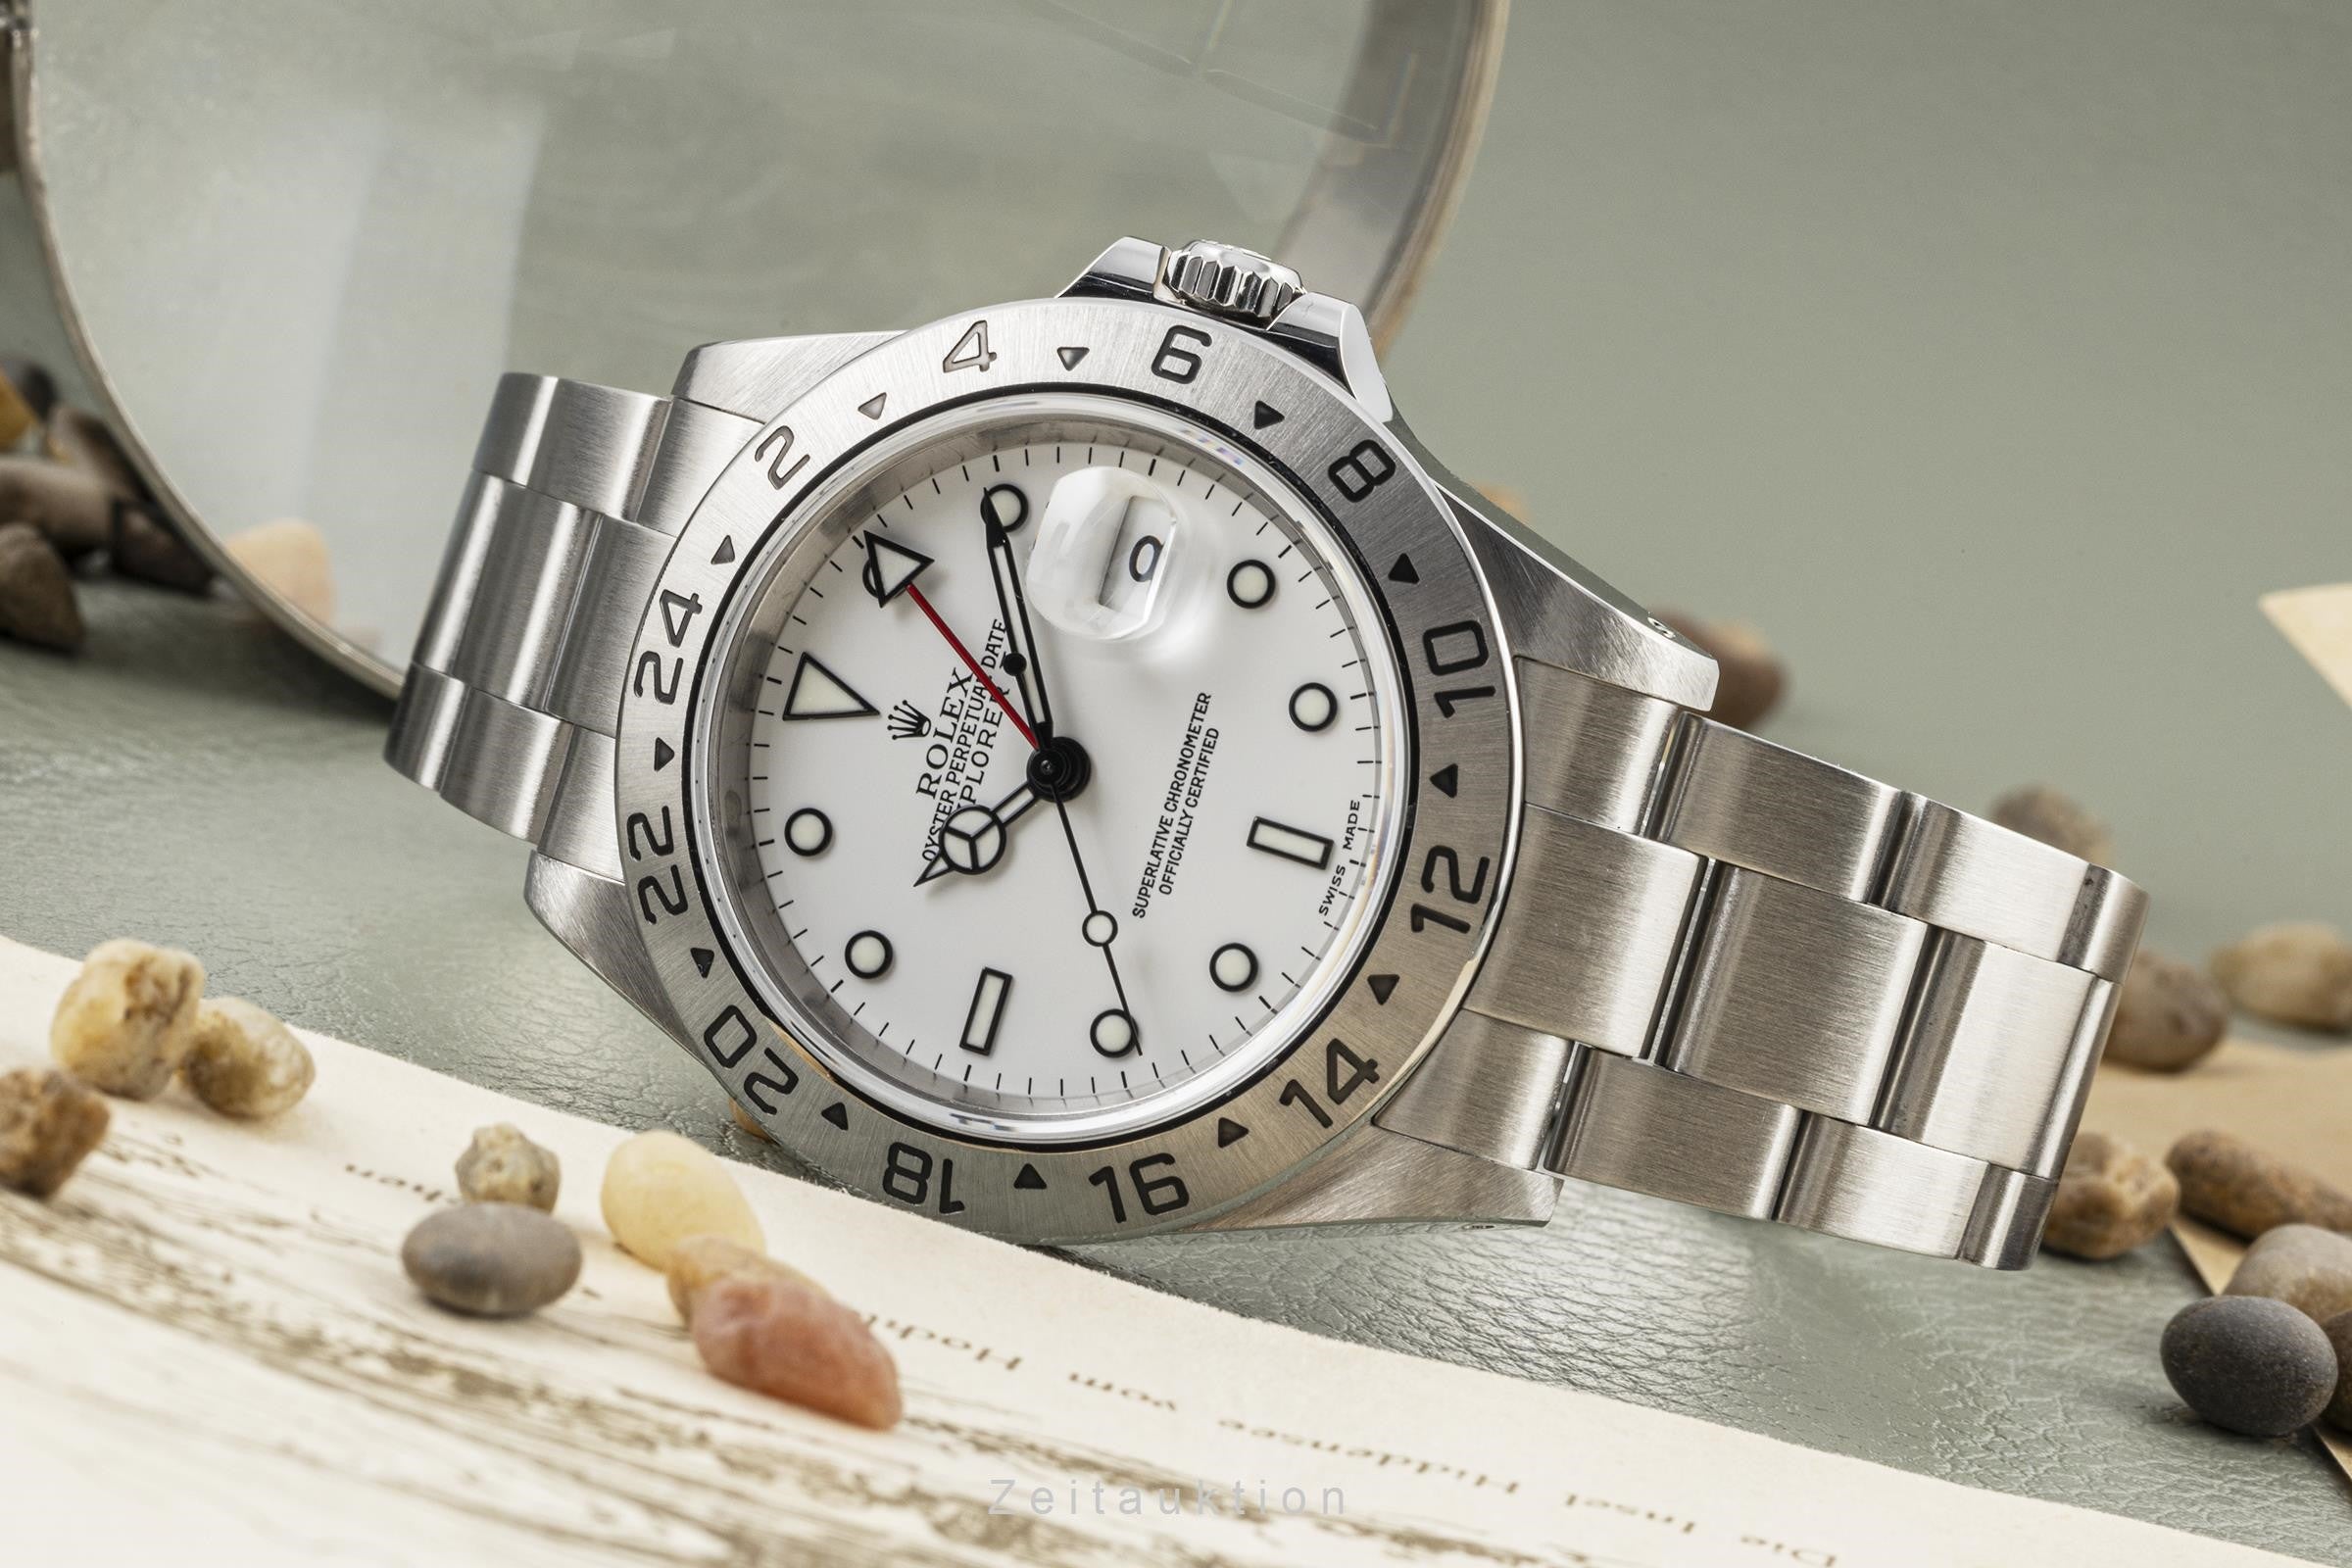 Everest Journal When Rolex Truly Became Independent